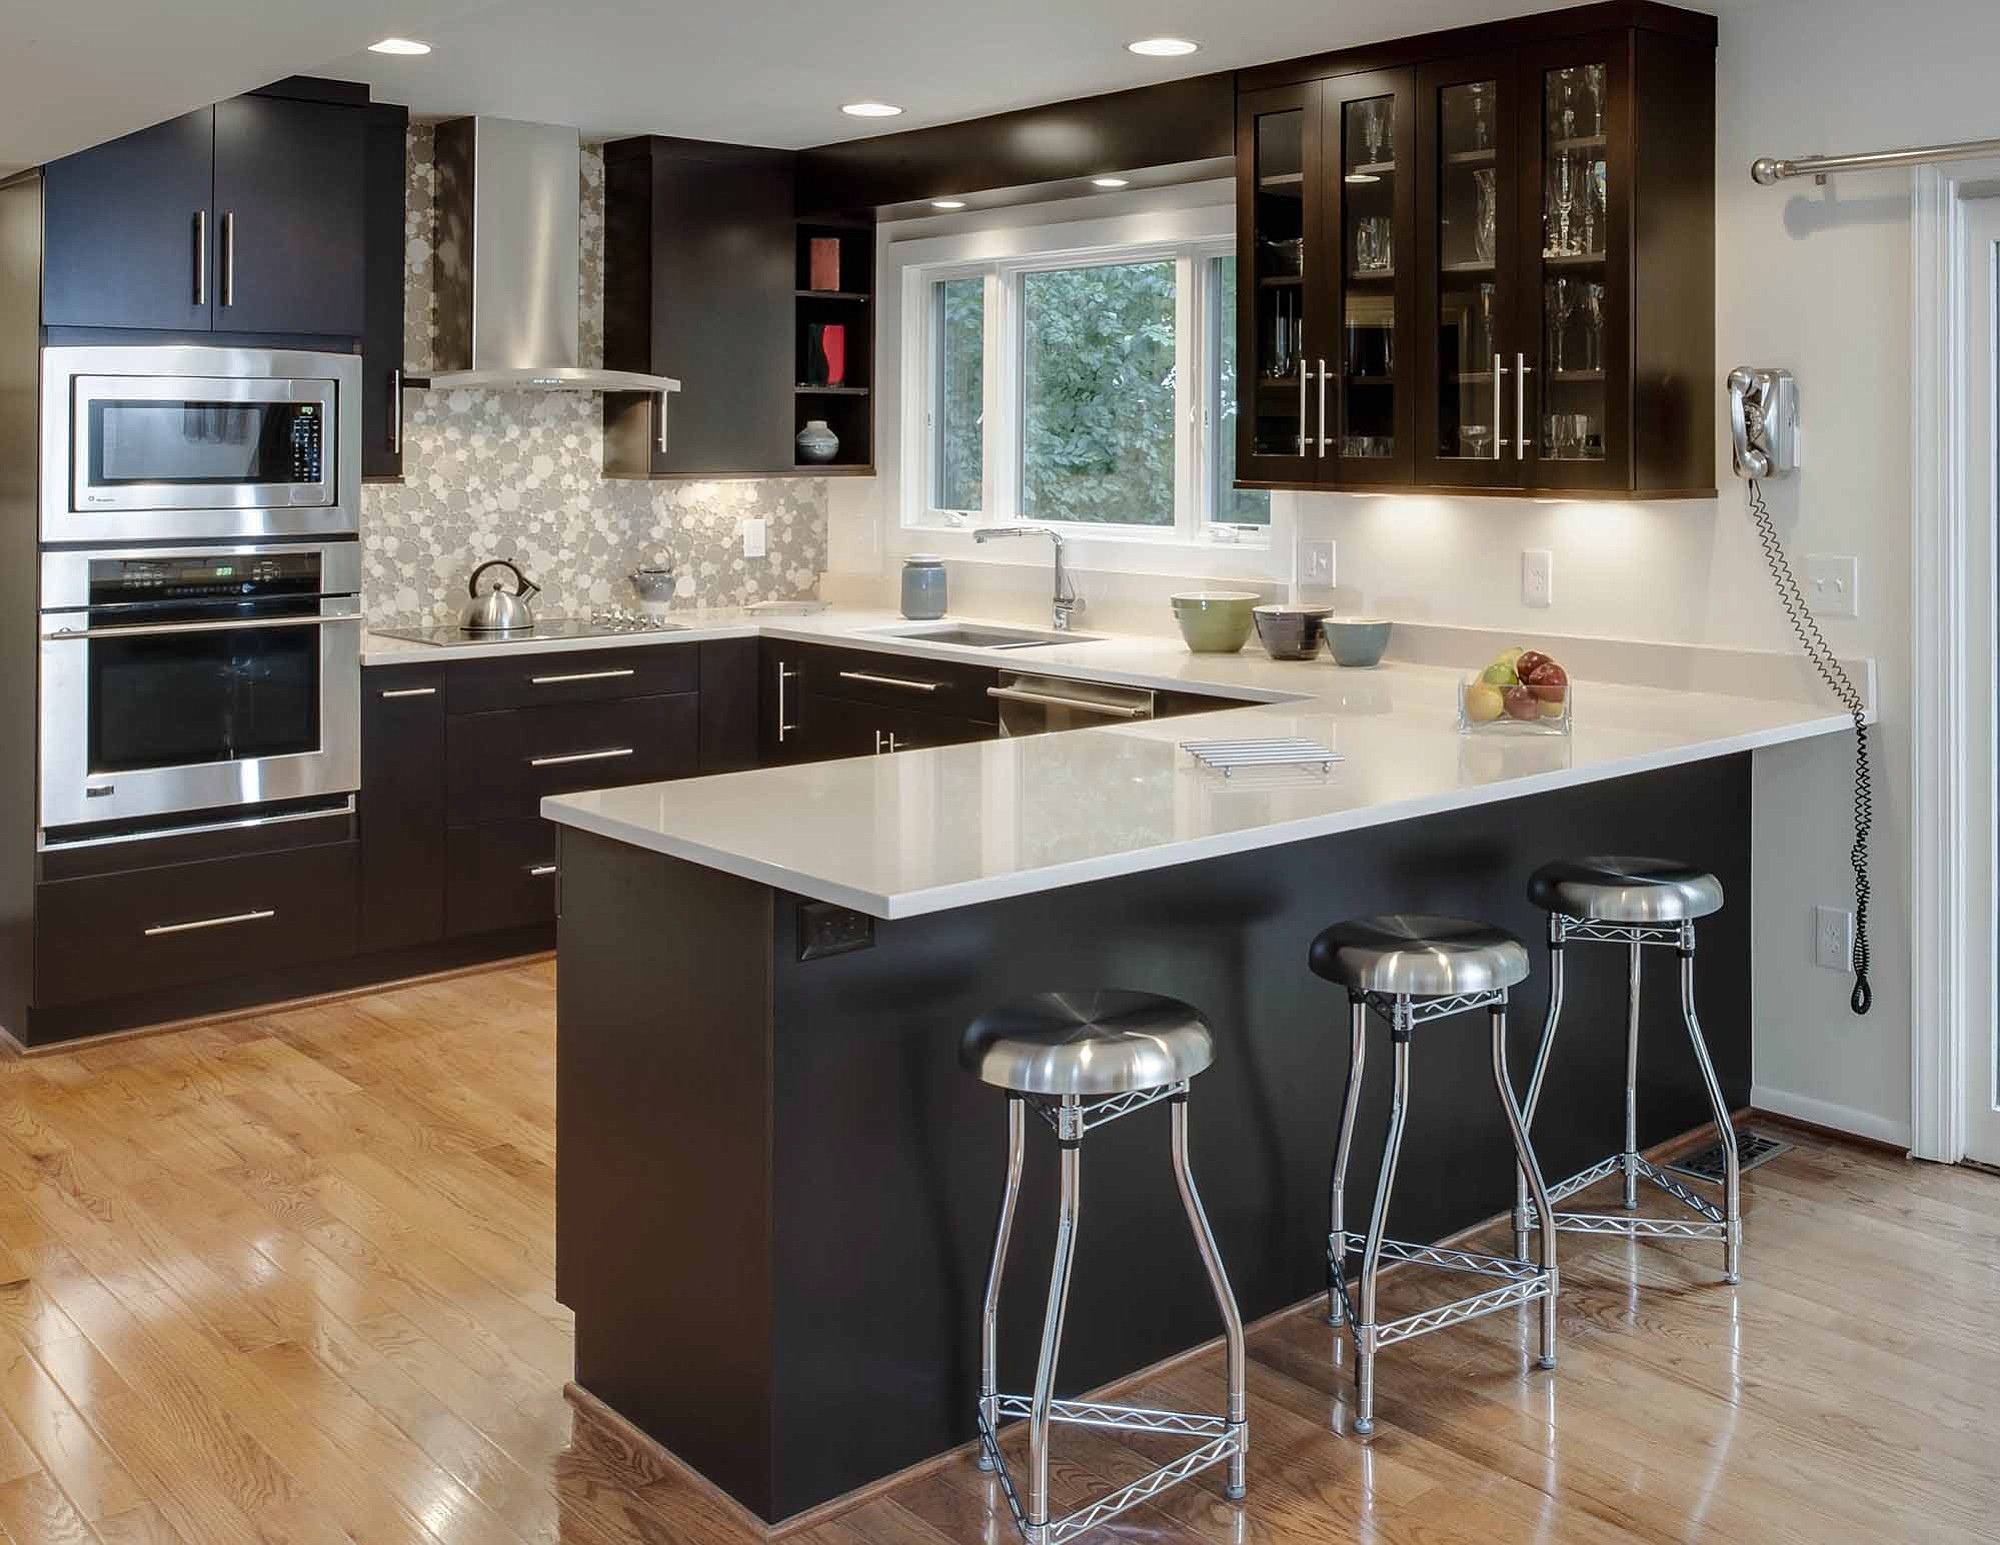 This kitchen designed by Kitchen Encoungers of Annapolis, Md., features maple cabinets painted ebony.